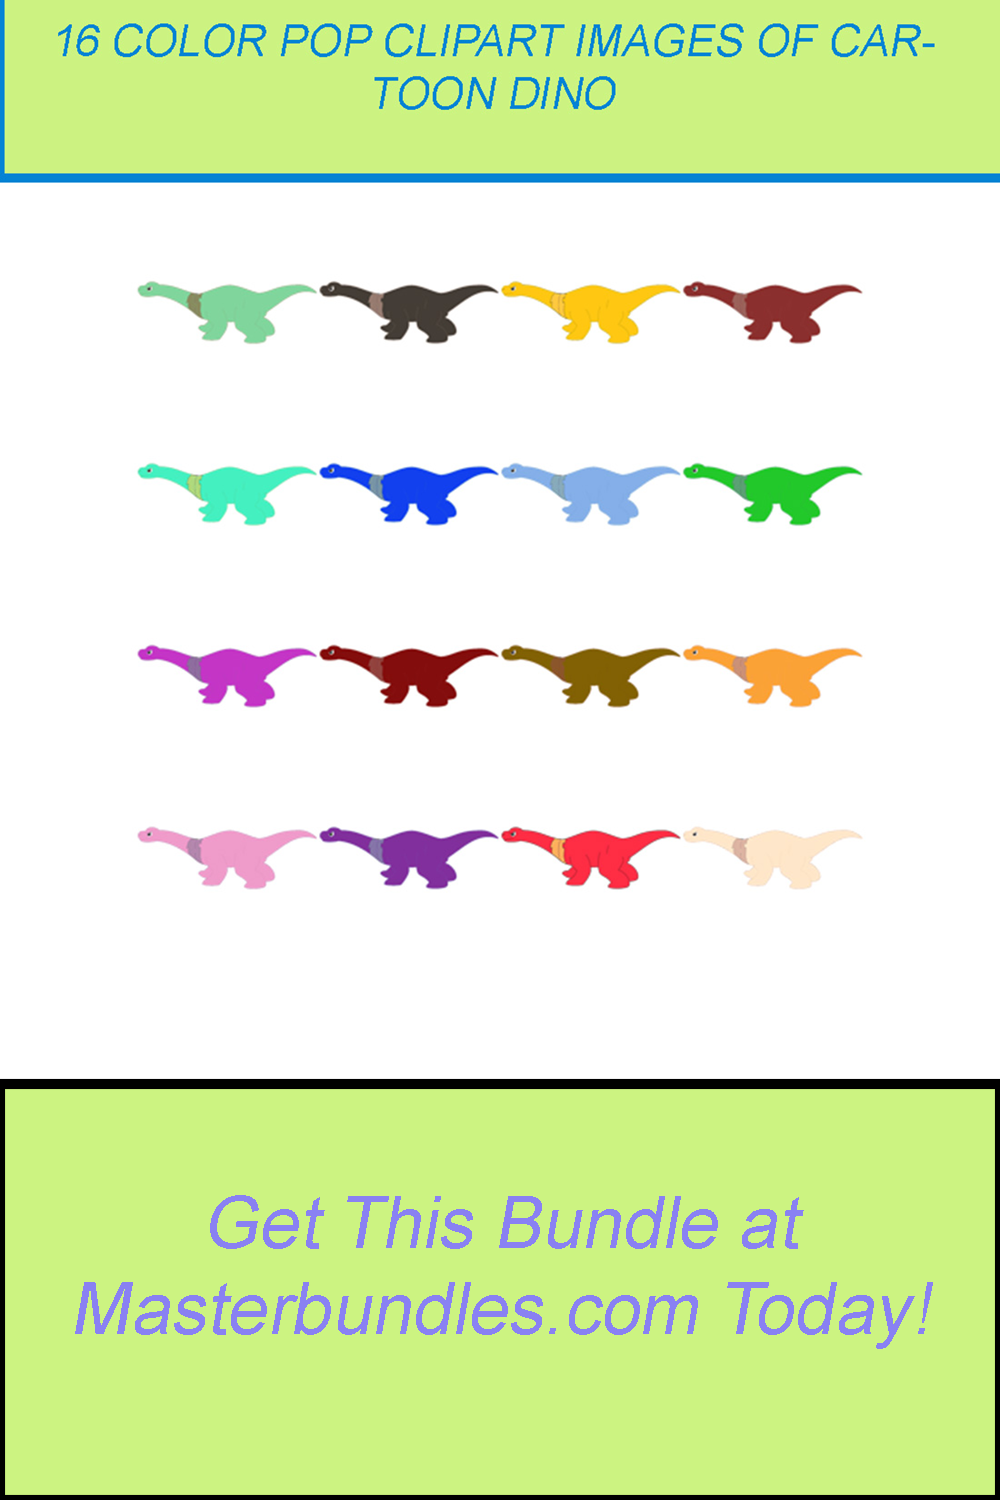 16 COLOR POP CLIPART IMAGES OF CARTOON DINO pinterest preview image.